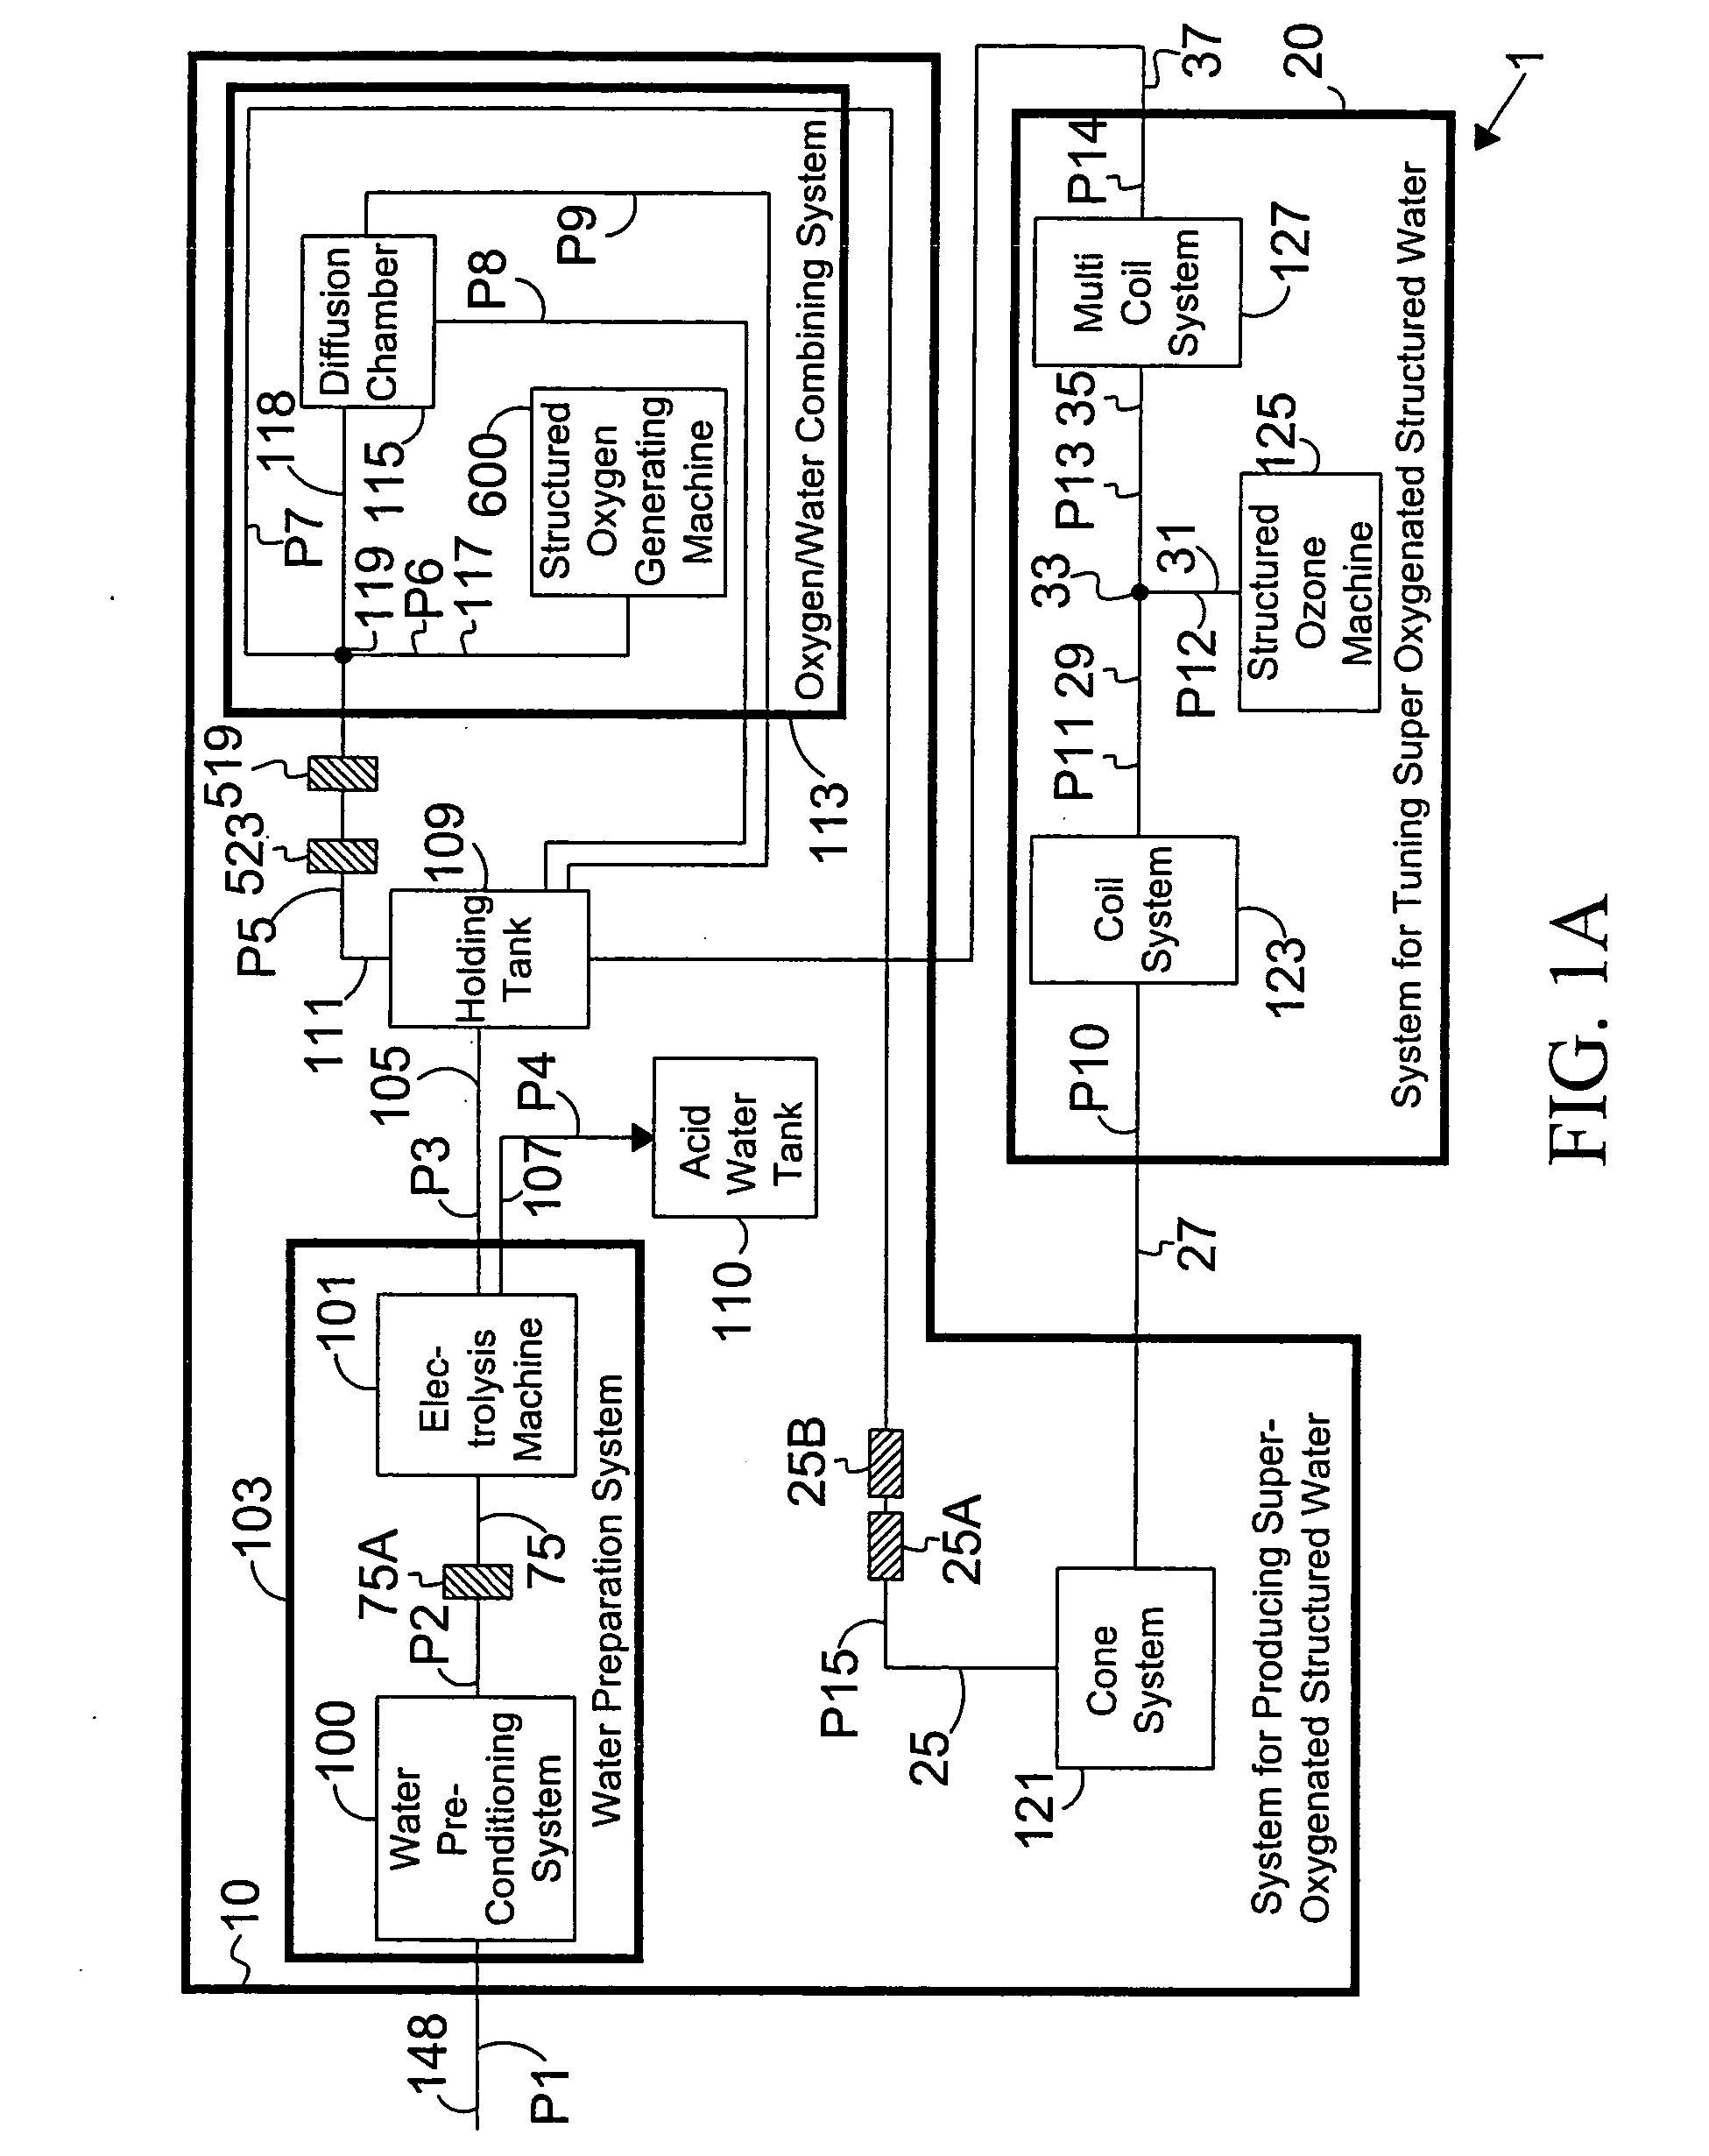 Method for producing super-oxygenated and structured water